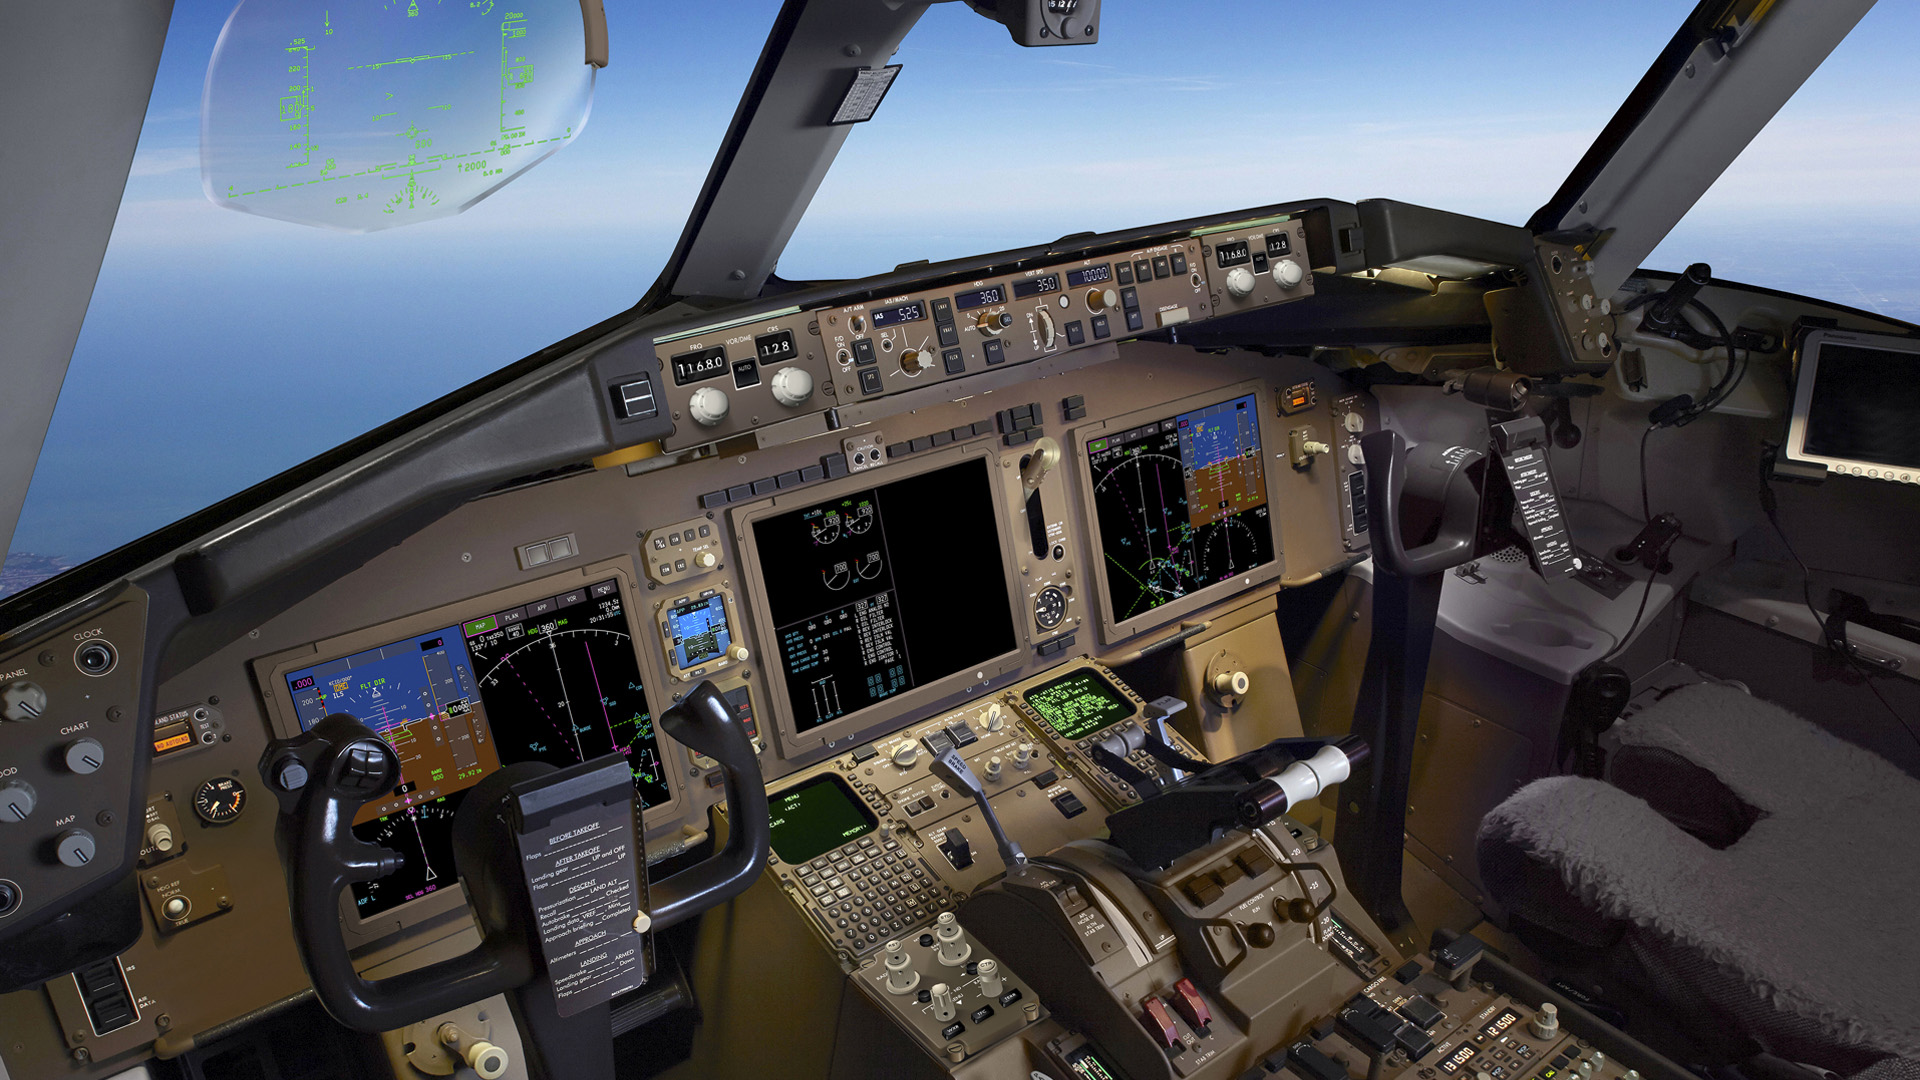 Airplane Technology Cockpit Chair Monitor Buttons Multiple Display 1920x1080